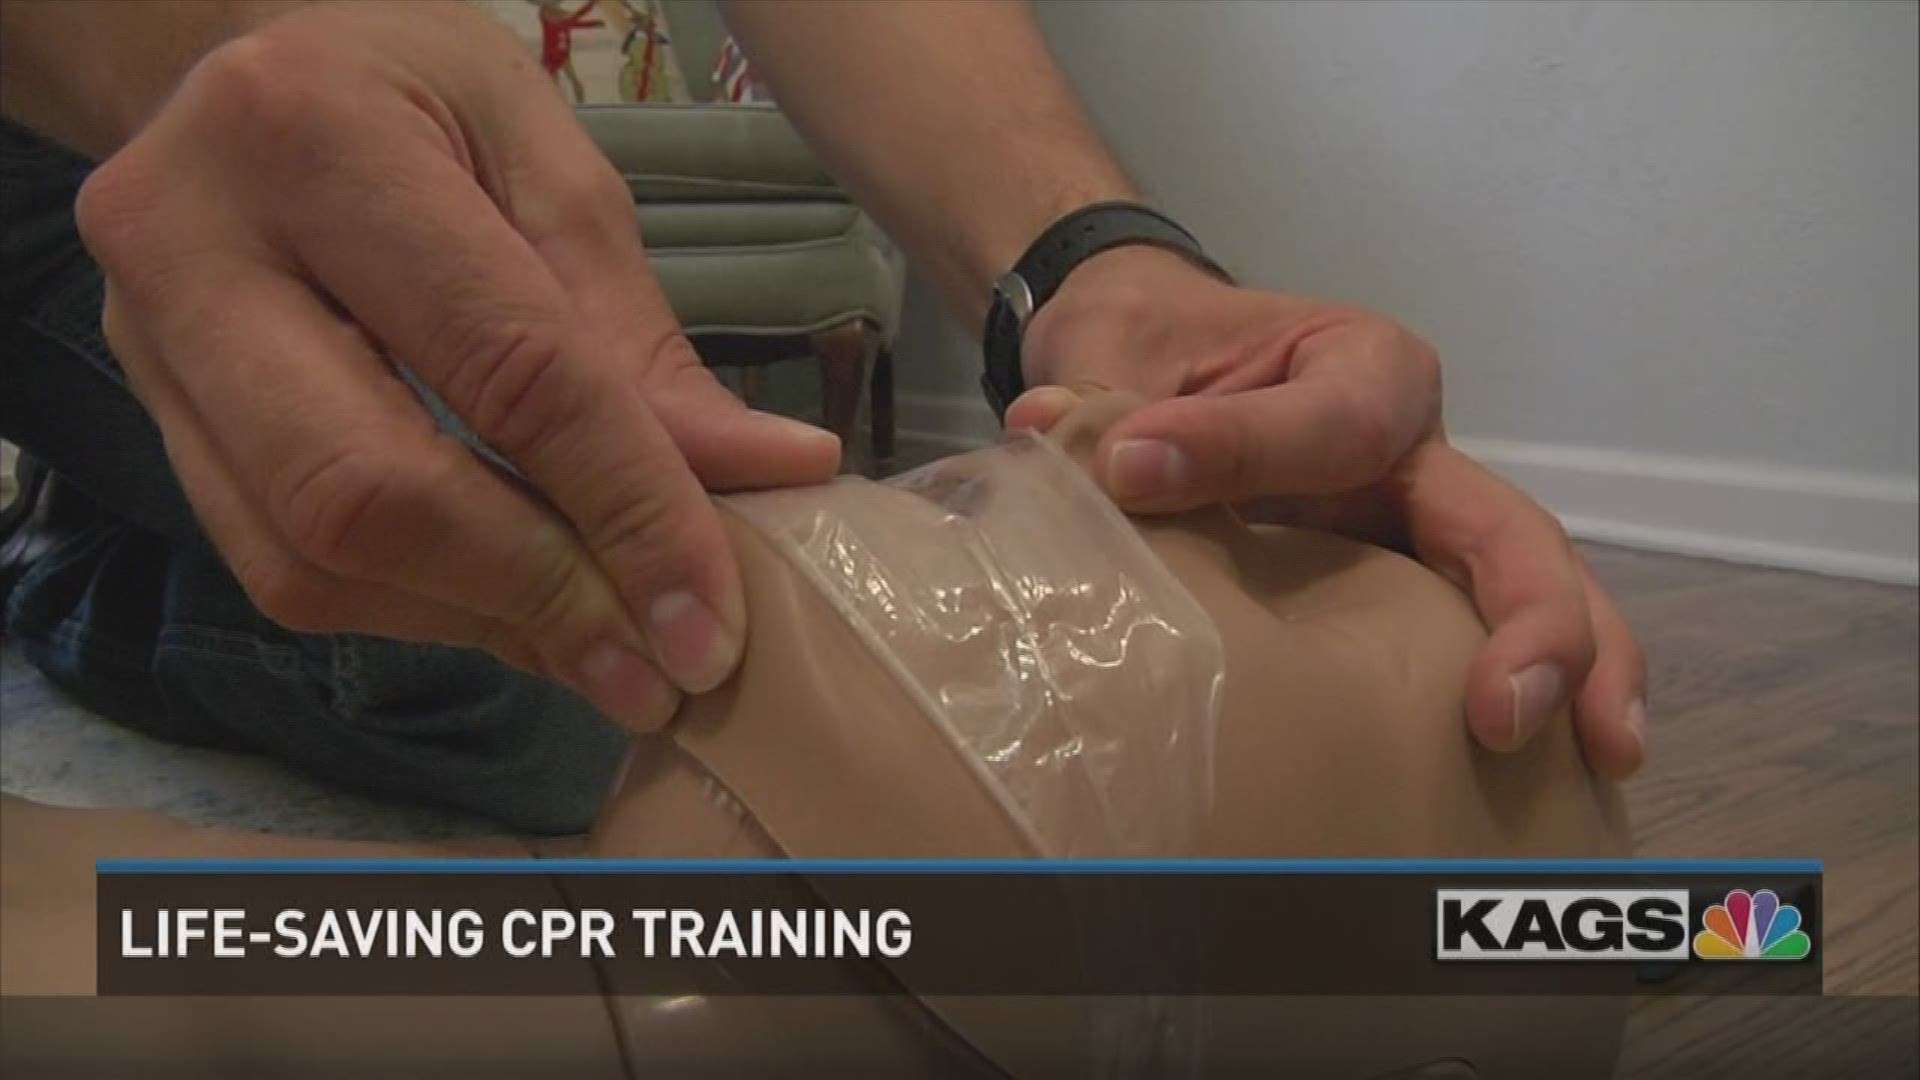 CPR performed in the first few minutes increases the chance of survival. A local expert says you don't have to be certified to perform CPR.